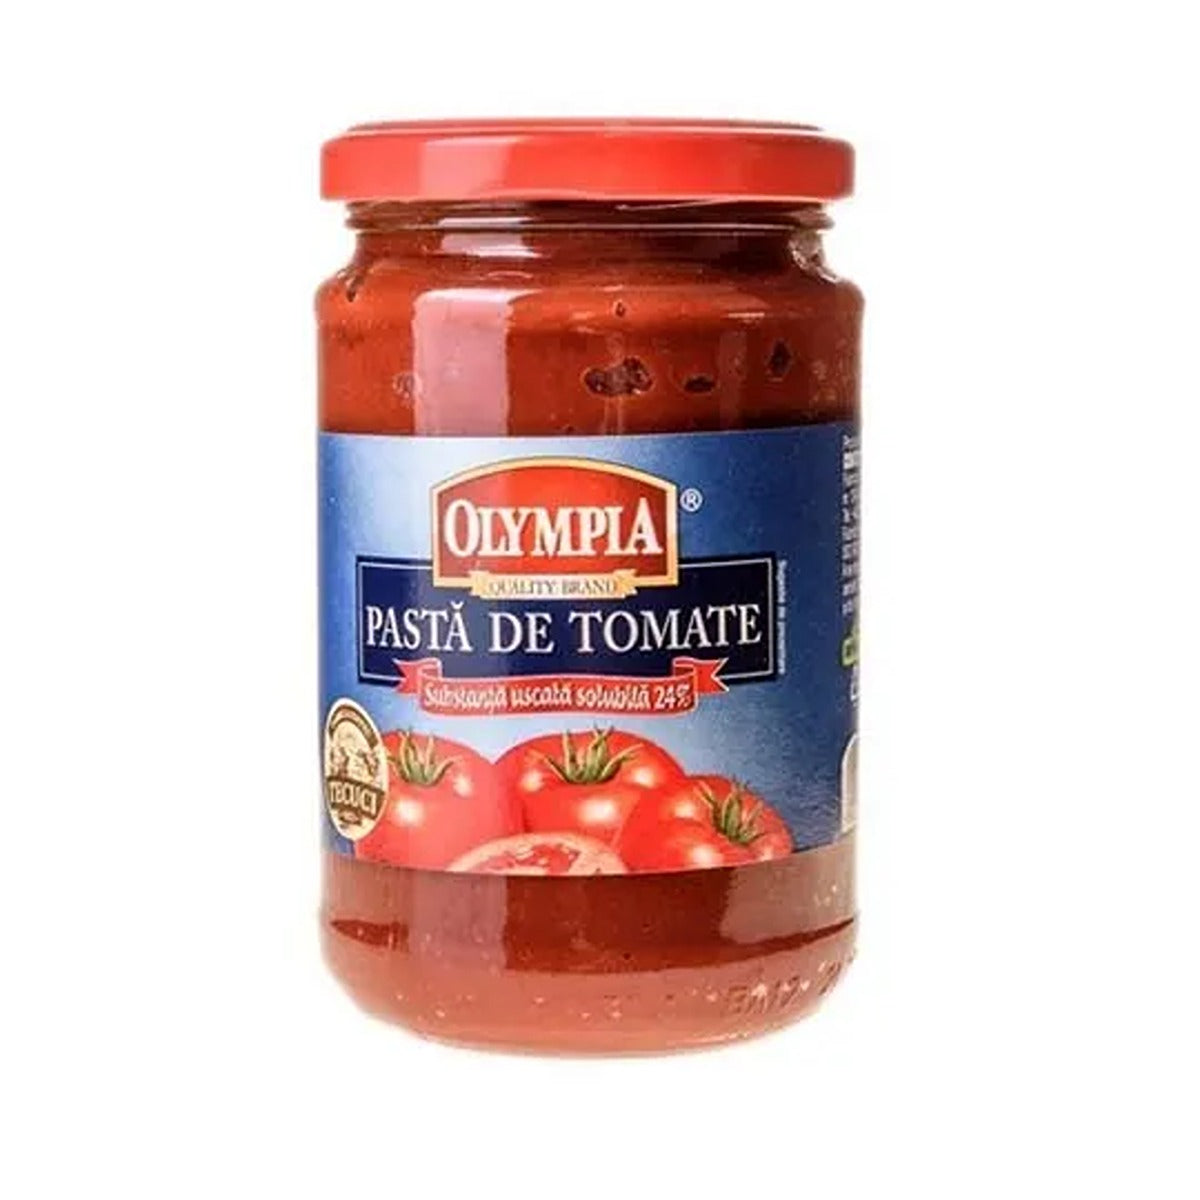 A jar of Olympia - Tomato Paste - 314g on a white background.